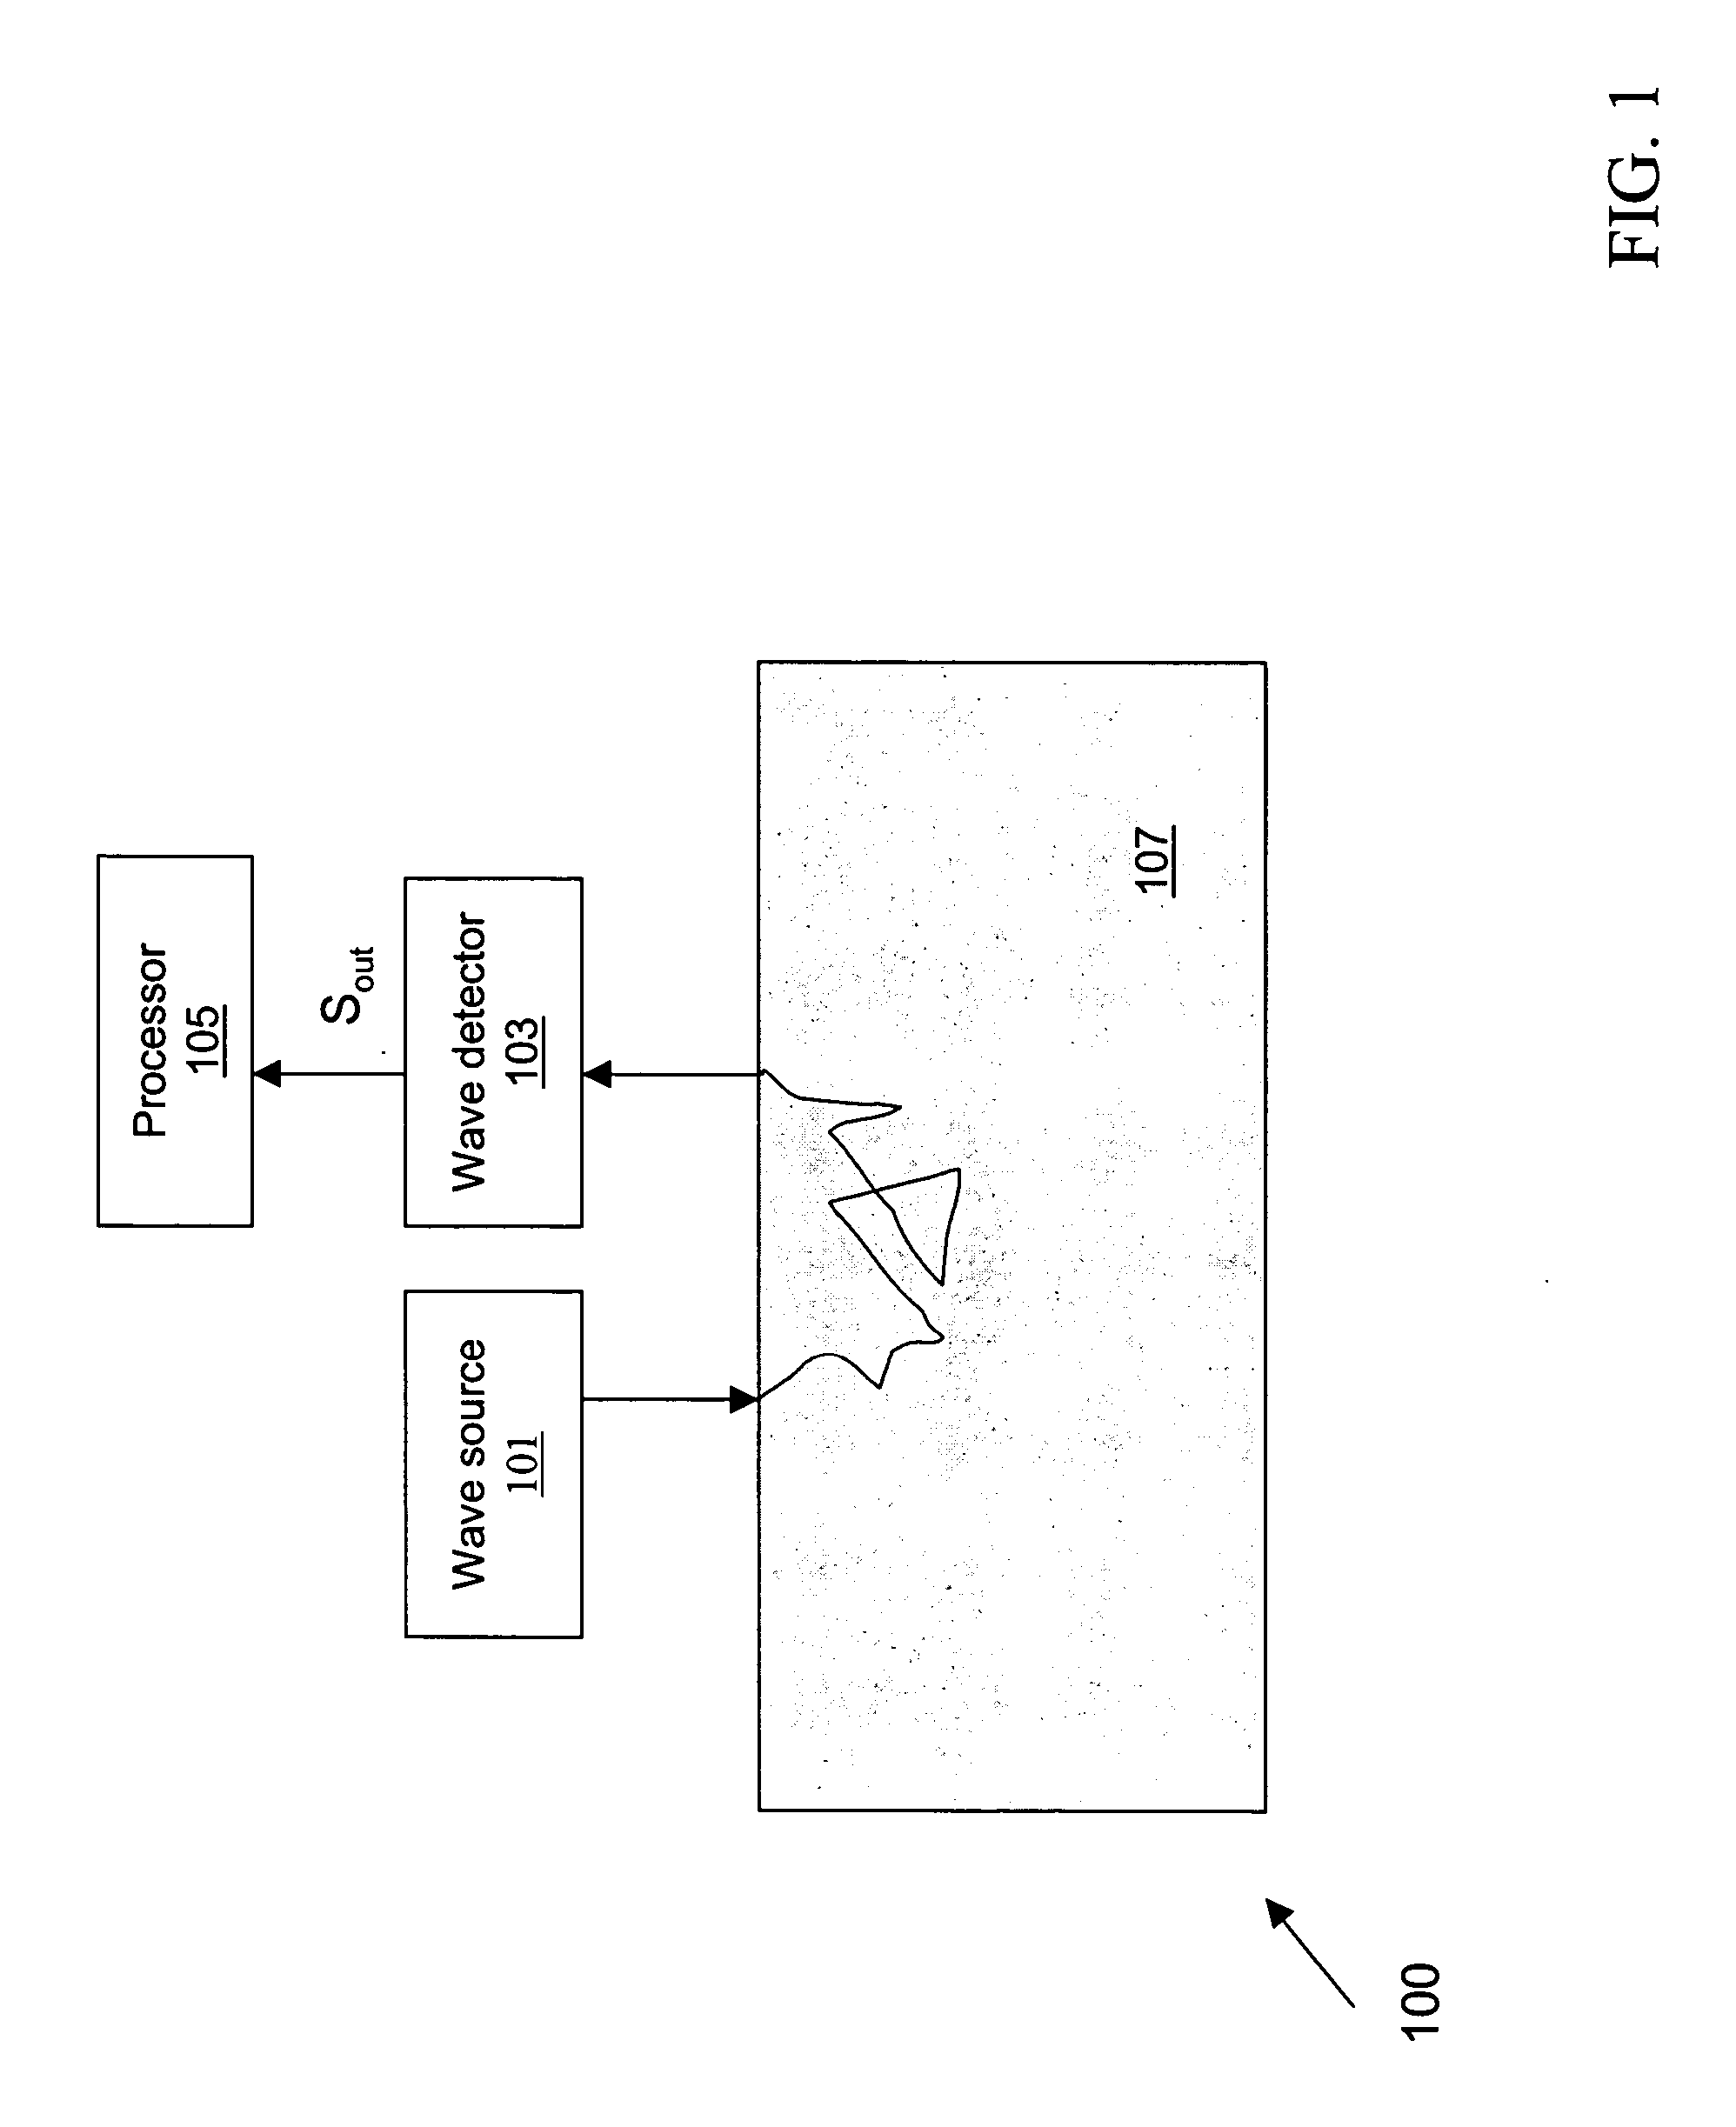 Optical apparatus and method of use for non-invasive tomographic scan of biological tissues